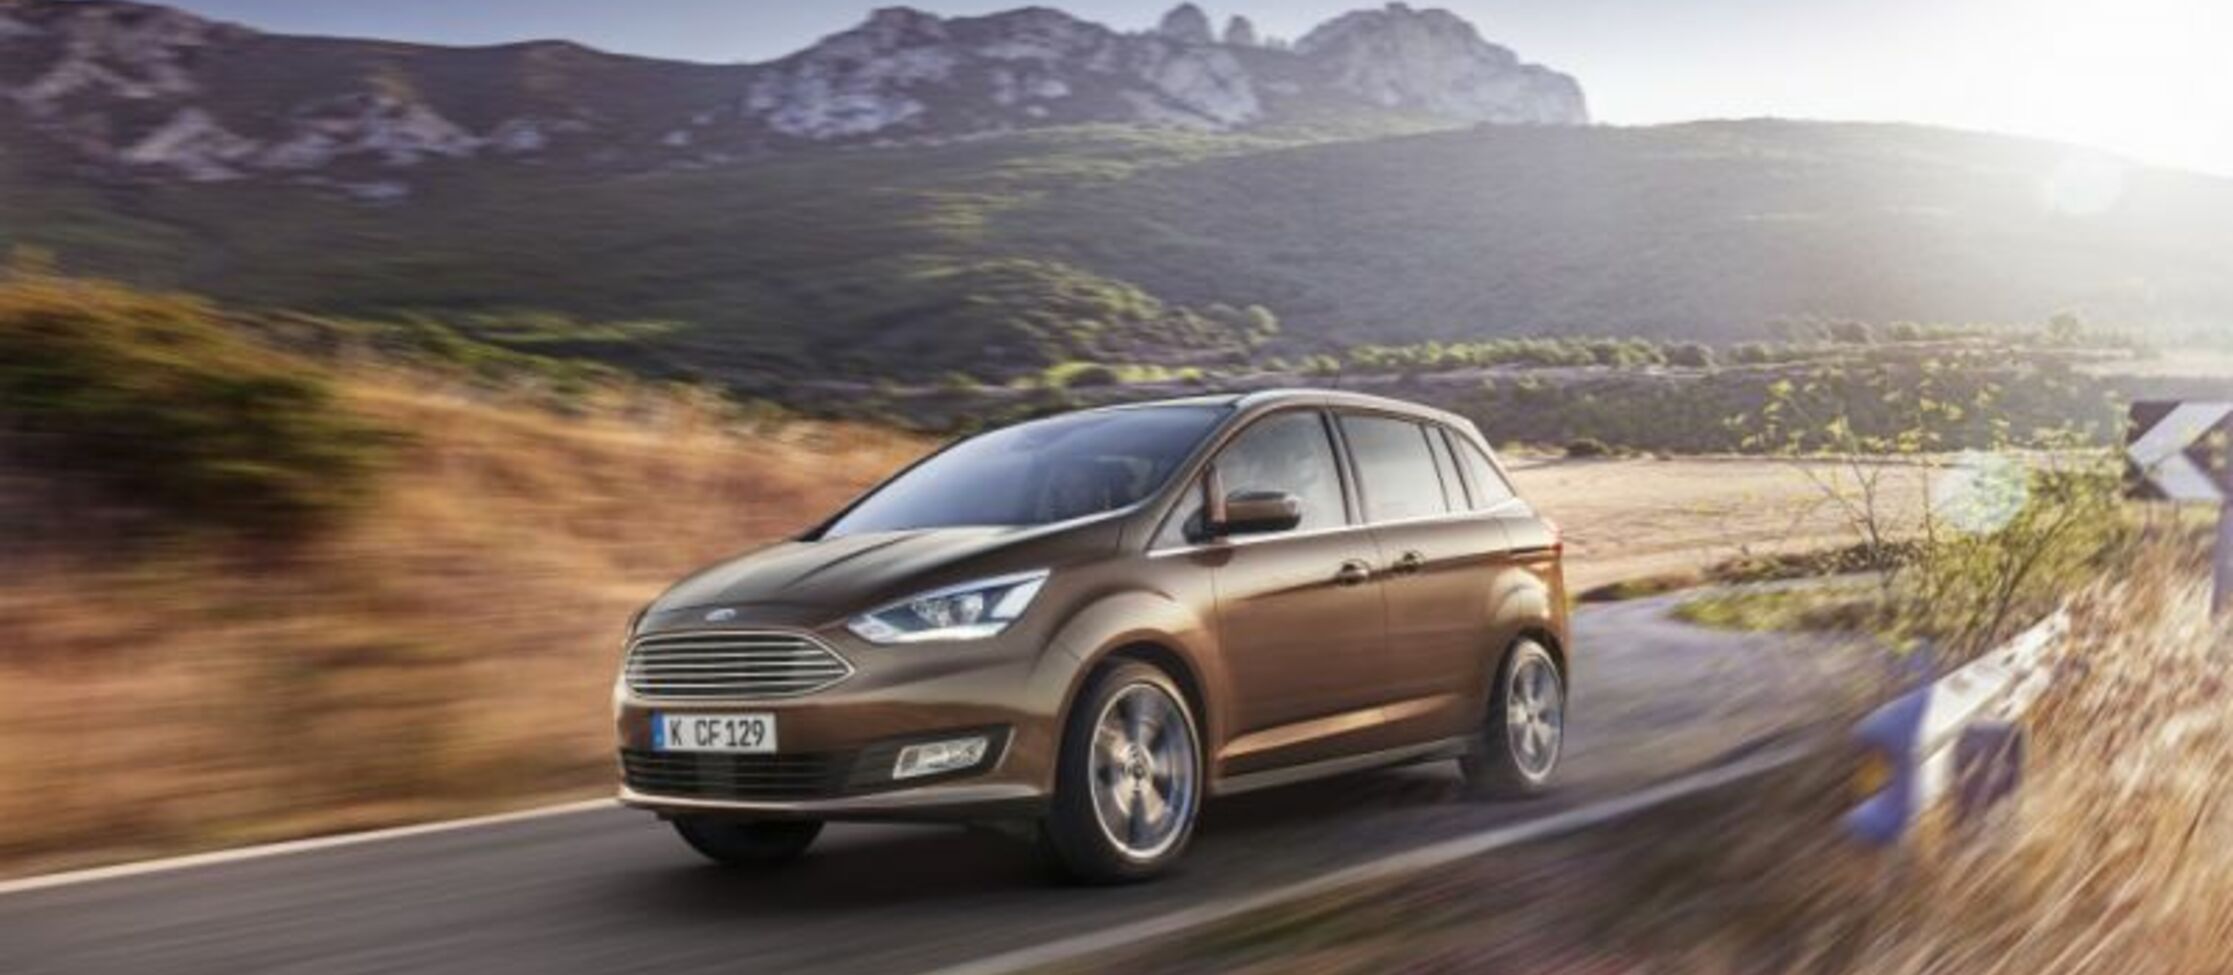 Ford Grand C-MAX (facelift 2015) 1.0 EcoBoost (125 Hp) S&S 7 Seat 2015, 2016, 2017, 2018, 2019, 2020, 2021